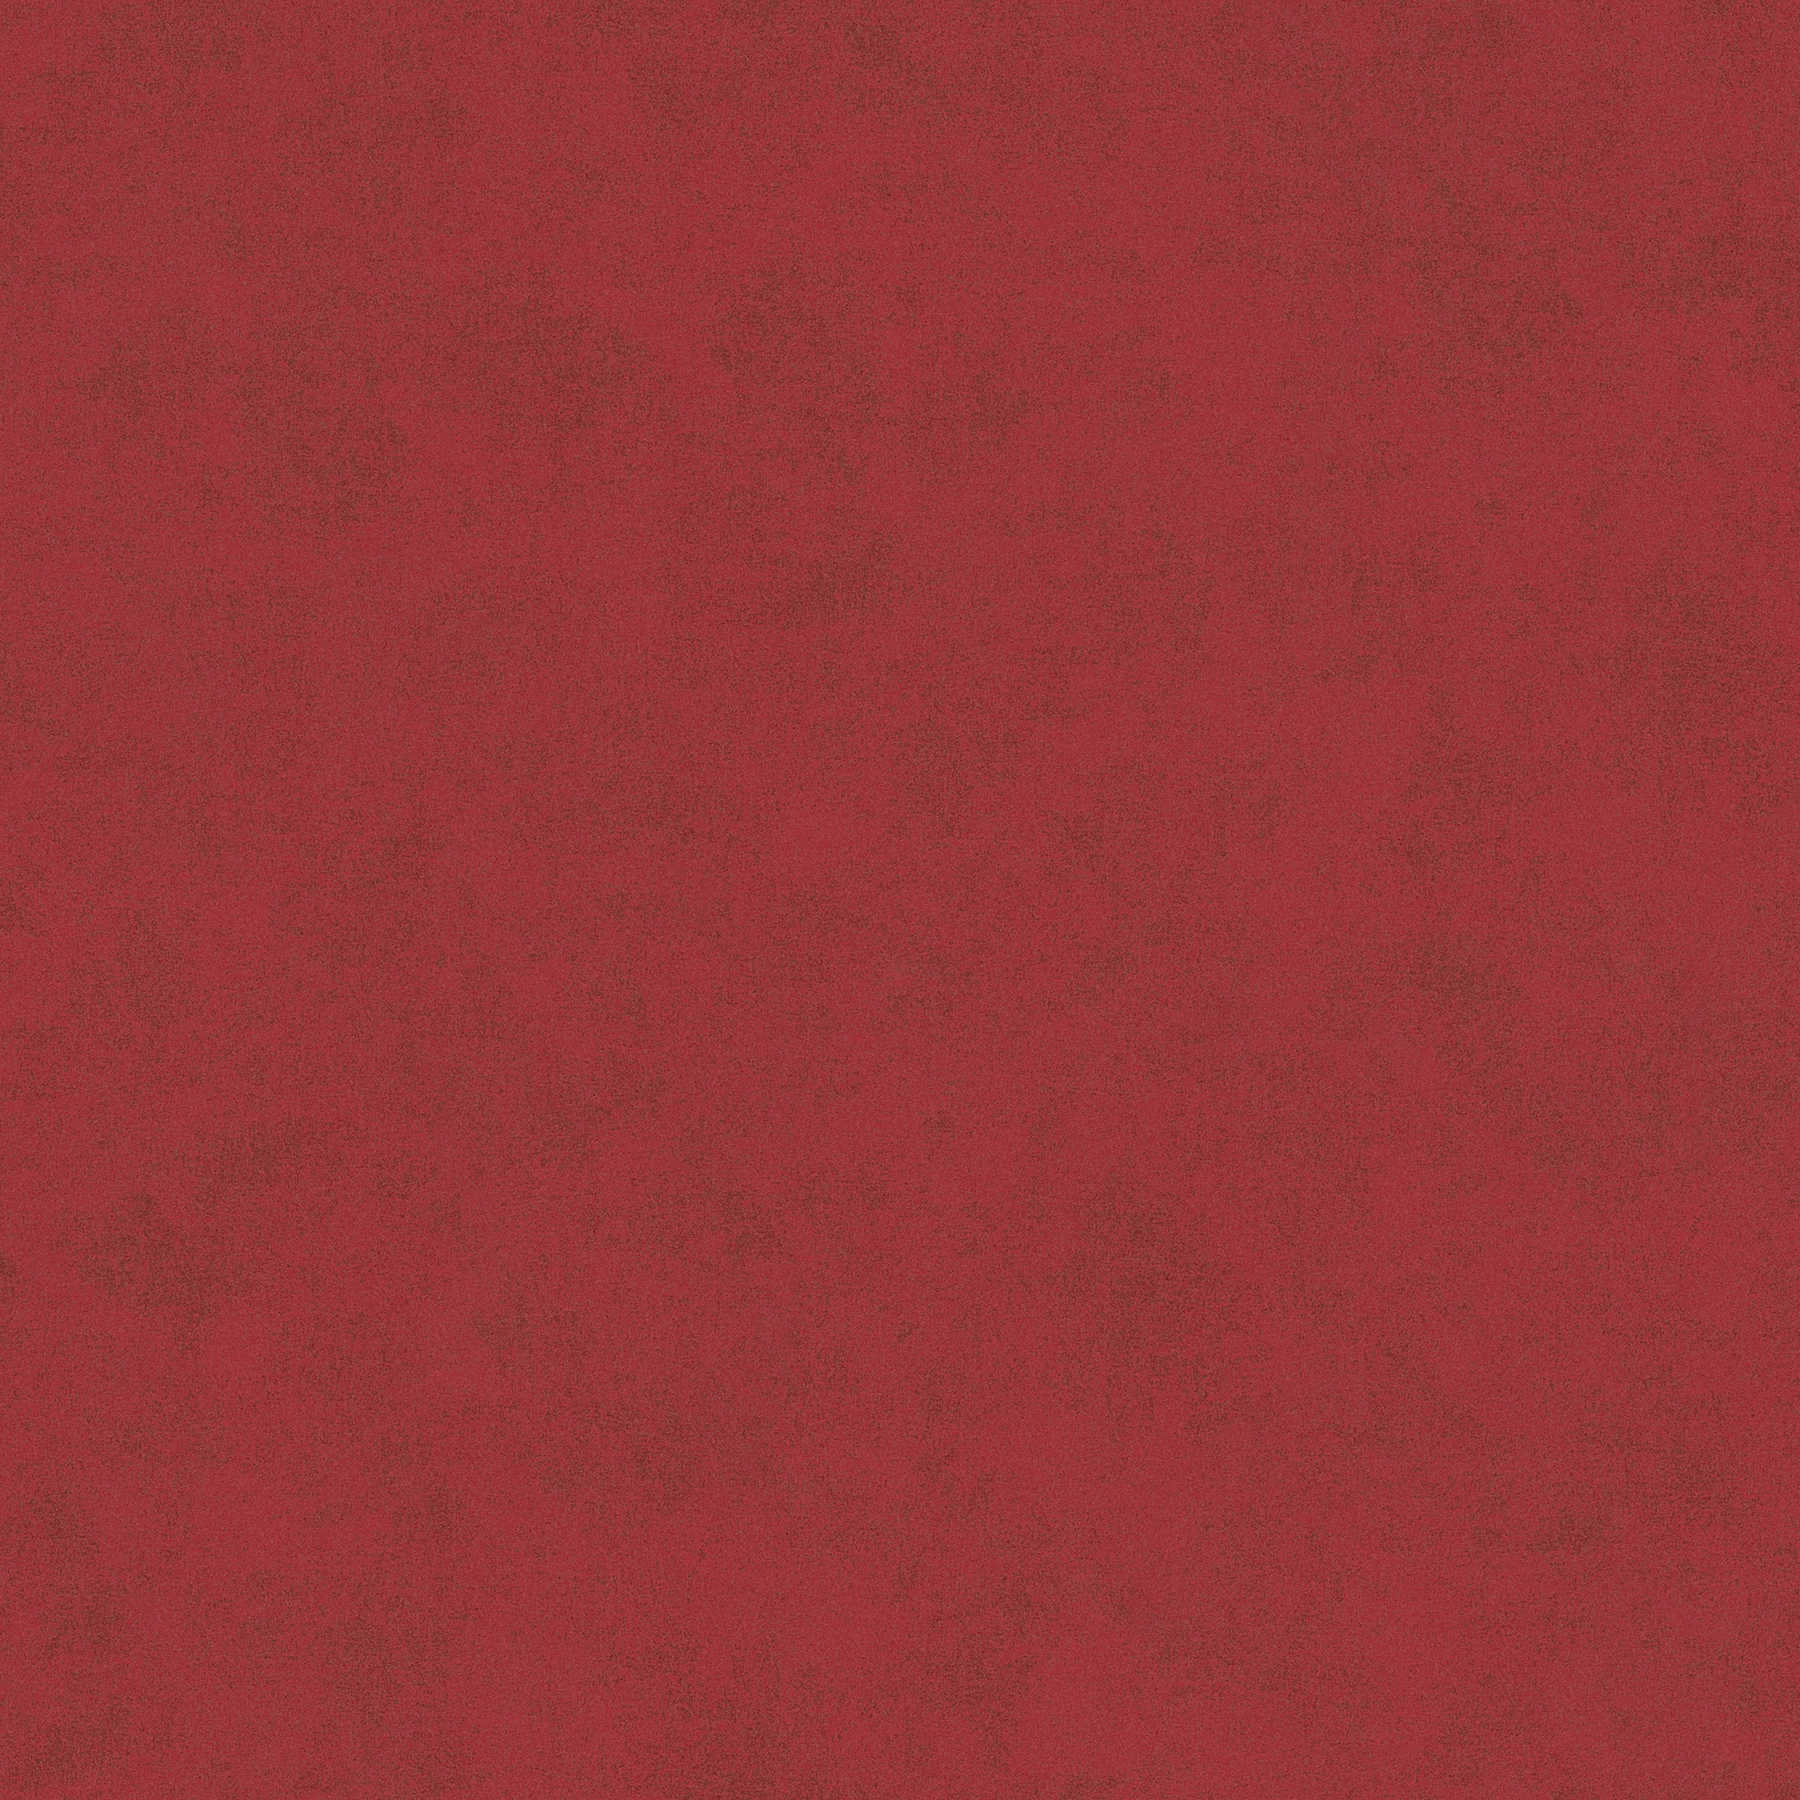 Plain non-woven wallpaper with mottled structure - red
